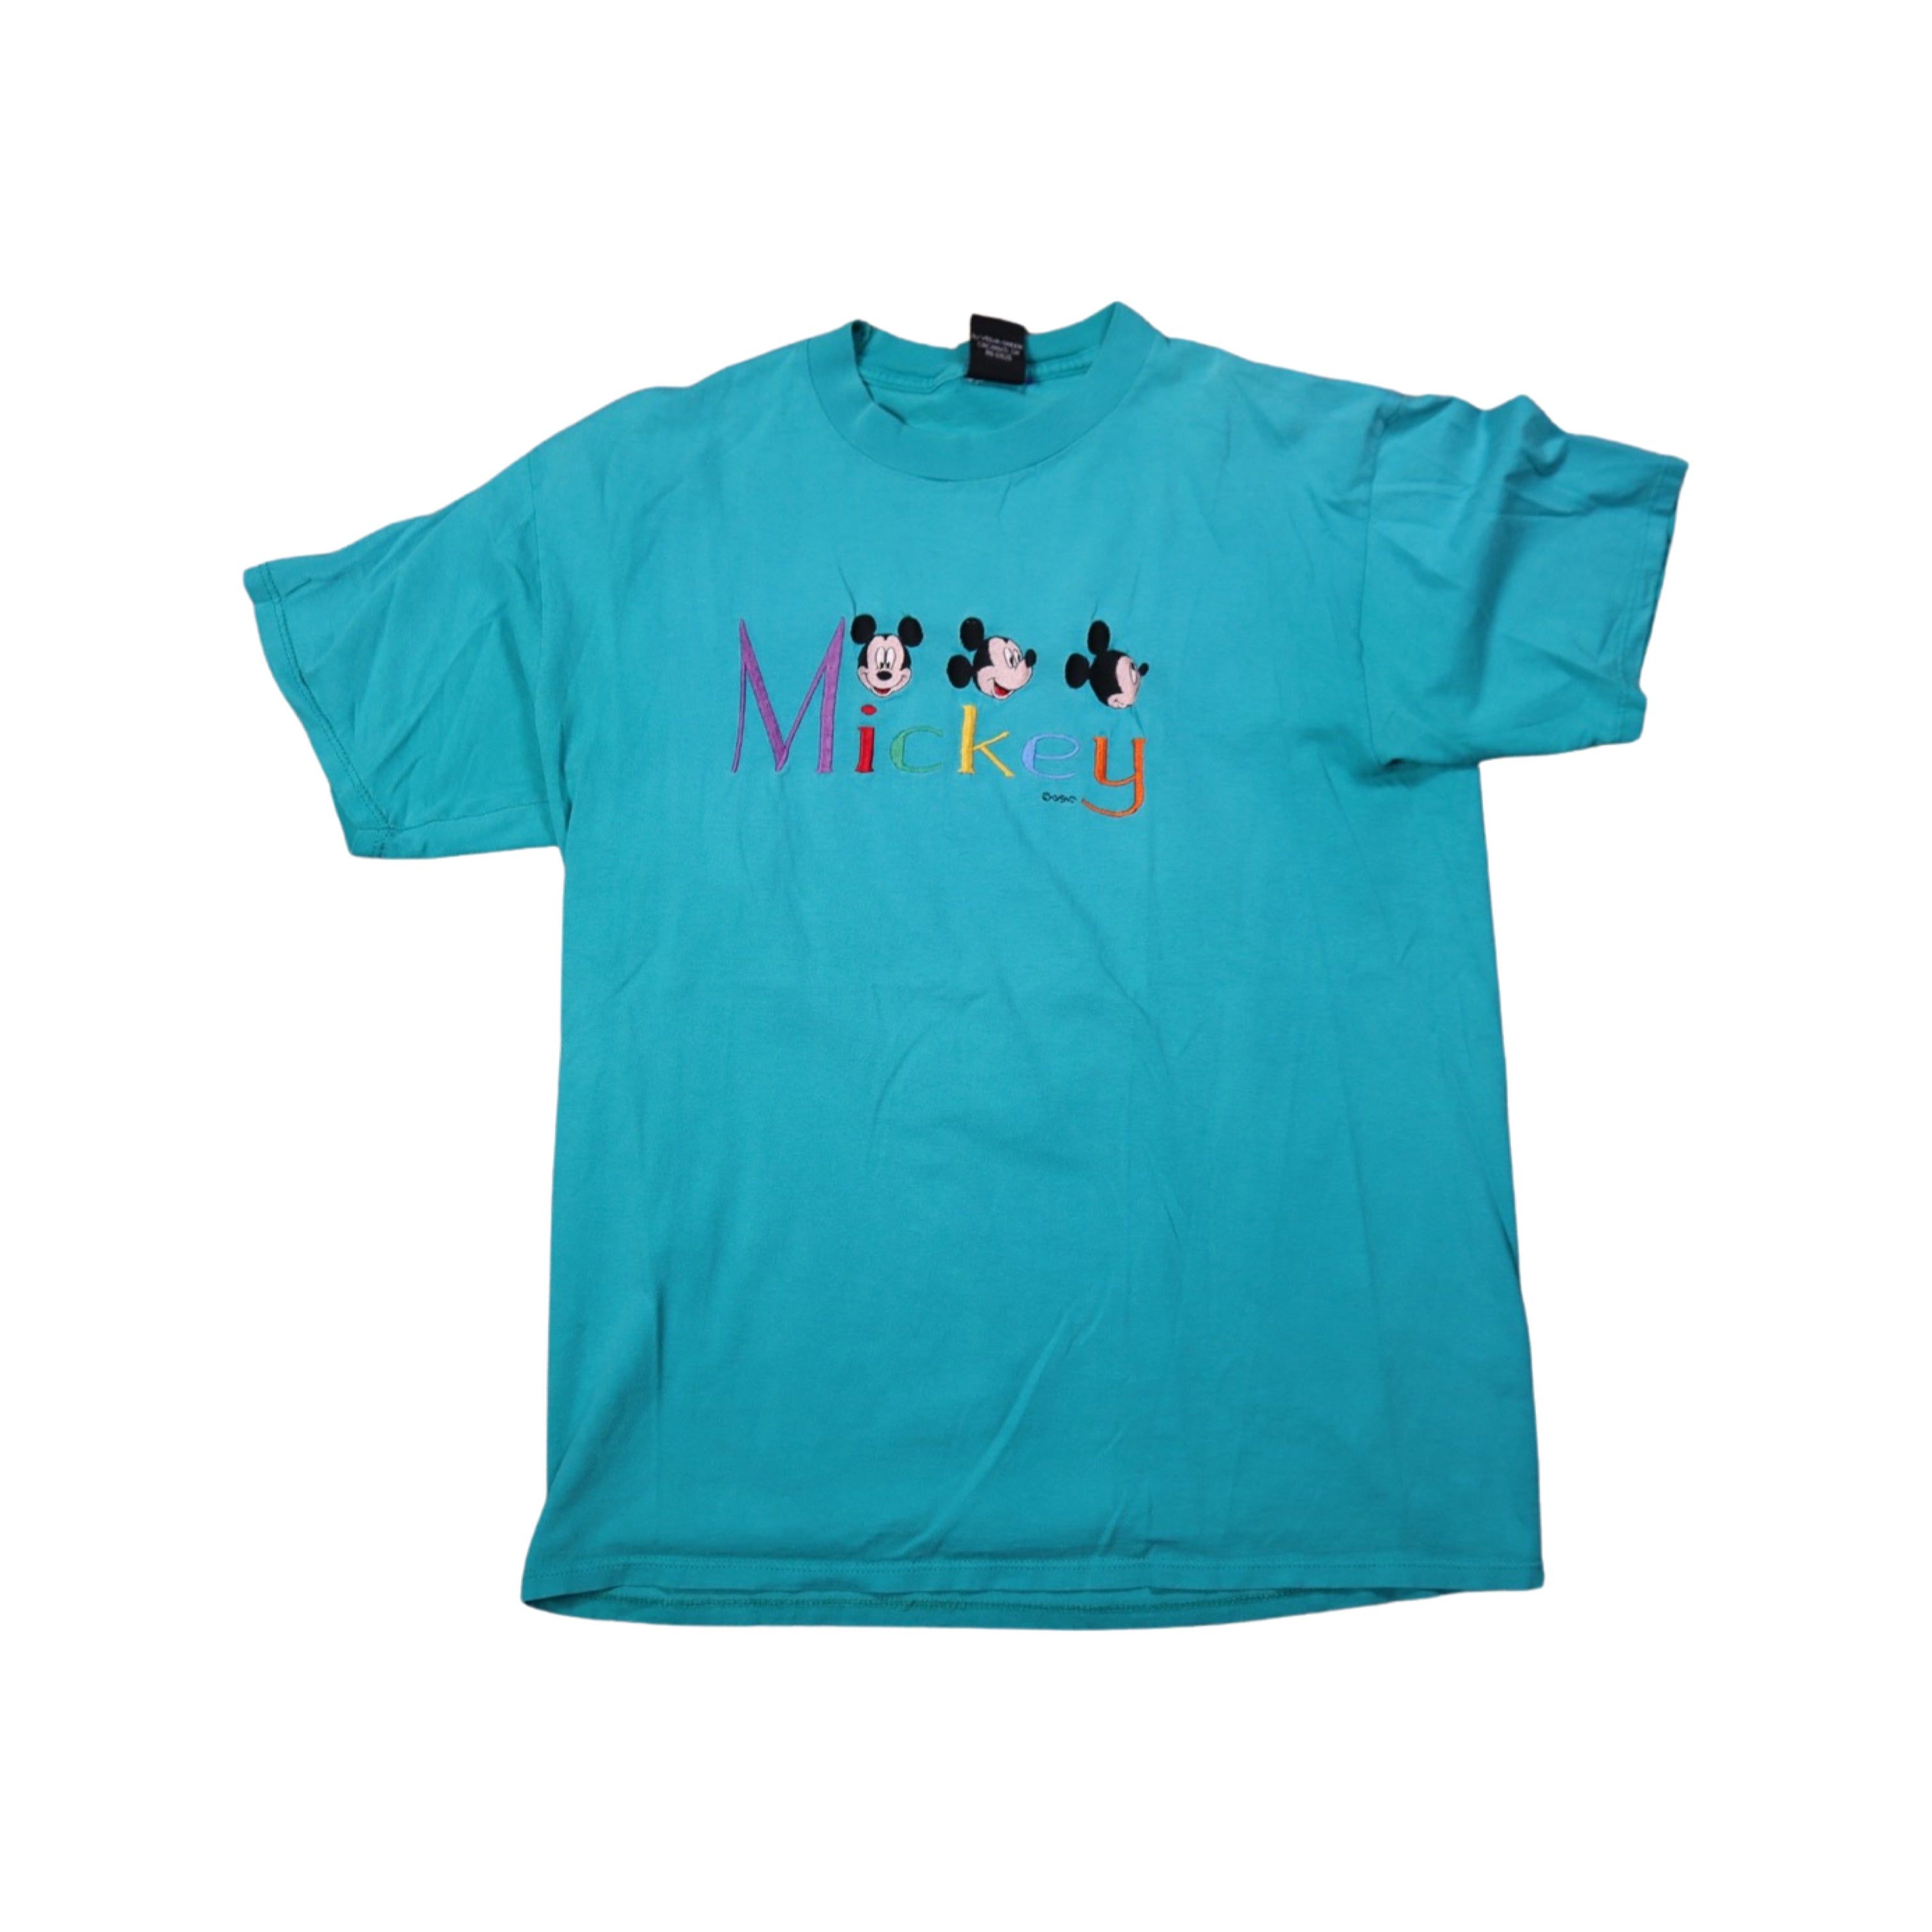 Teal Mickey Mouse 90s T-Shirt (Large)